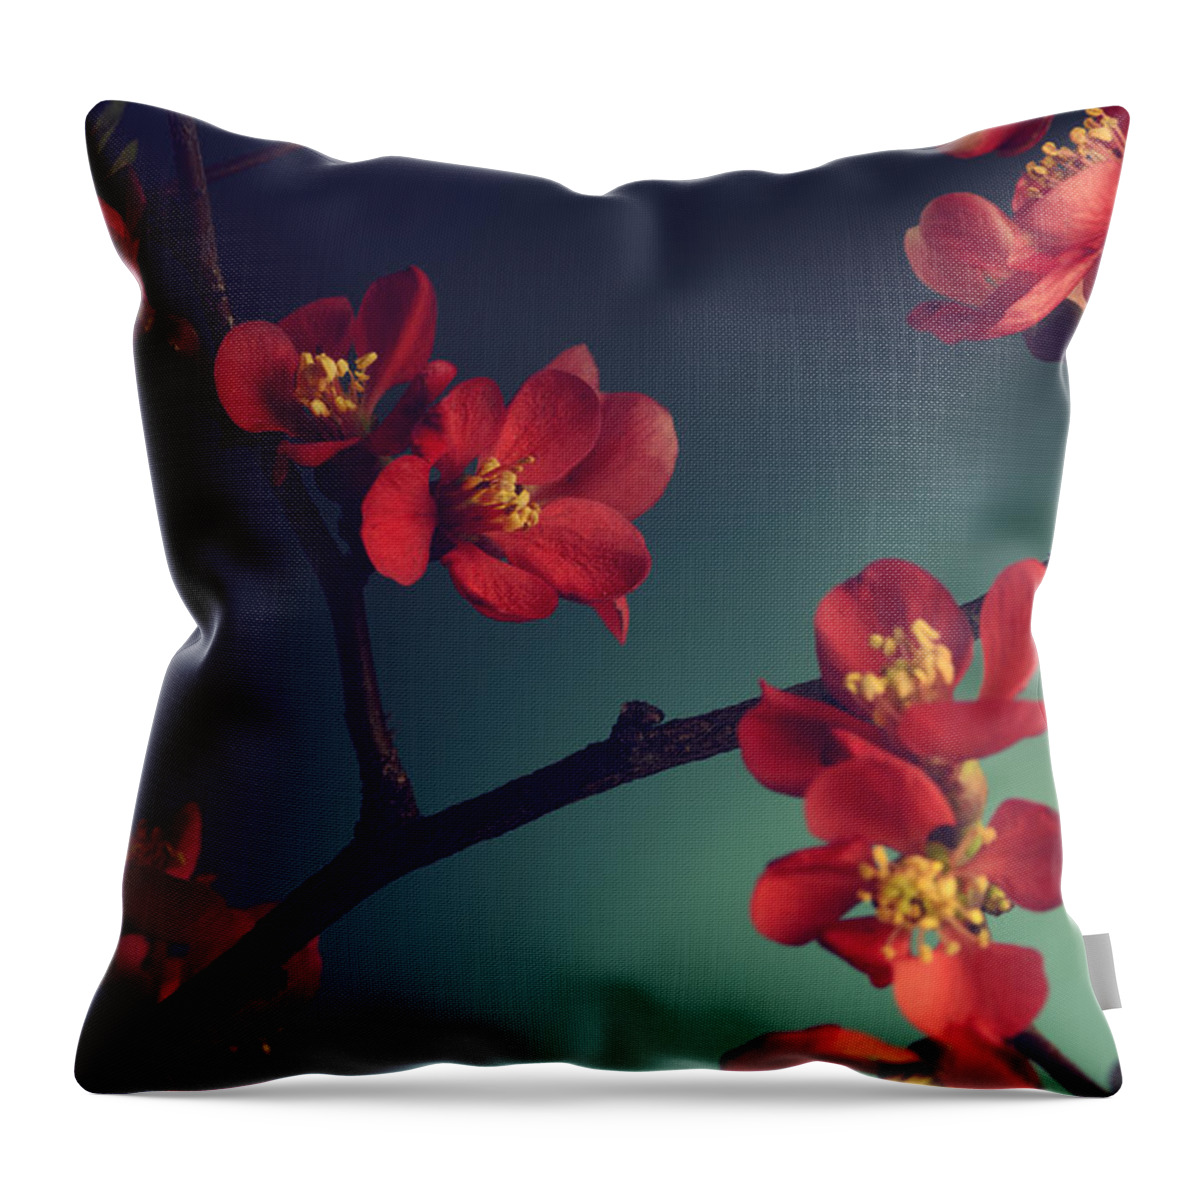 Flower Throw Pillow featuring the photograph Pink Flower Blossom by Jelena Jovanovic